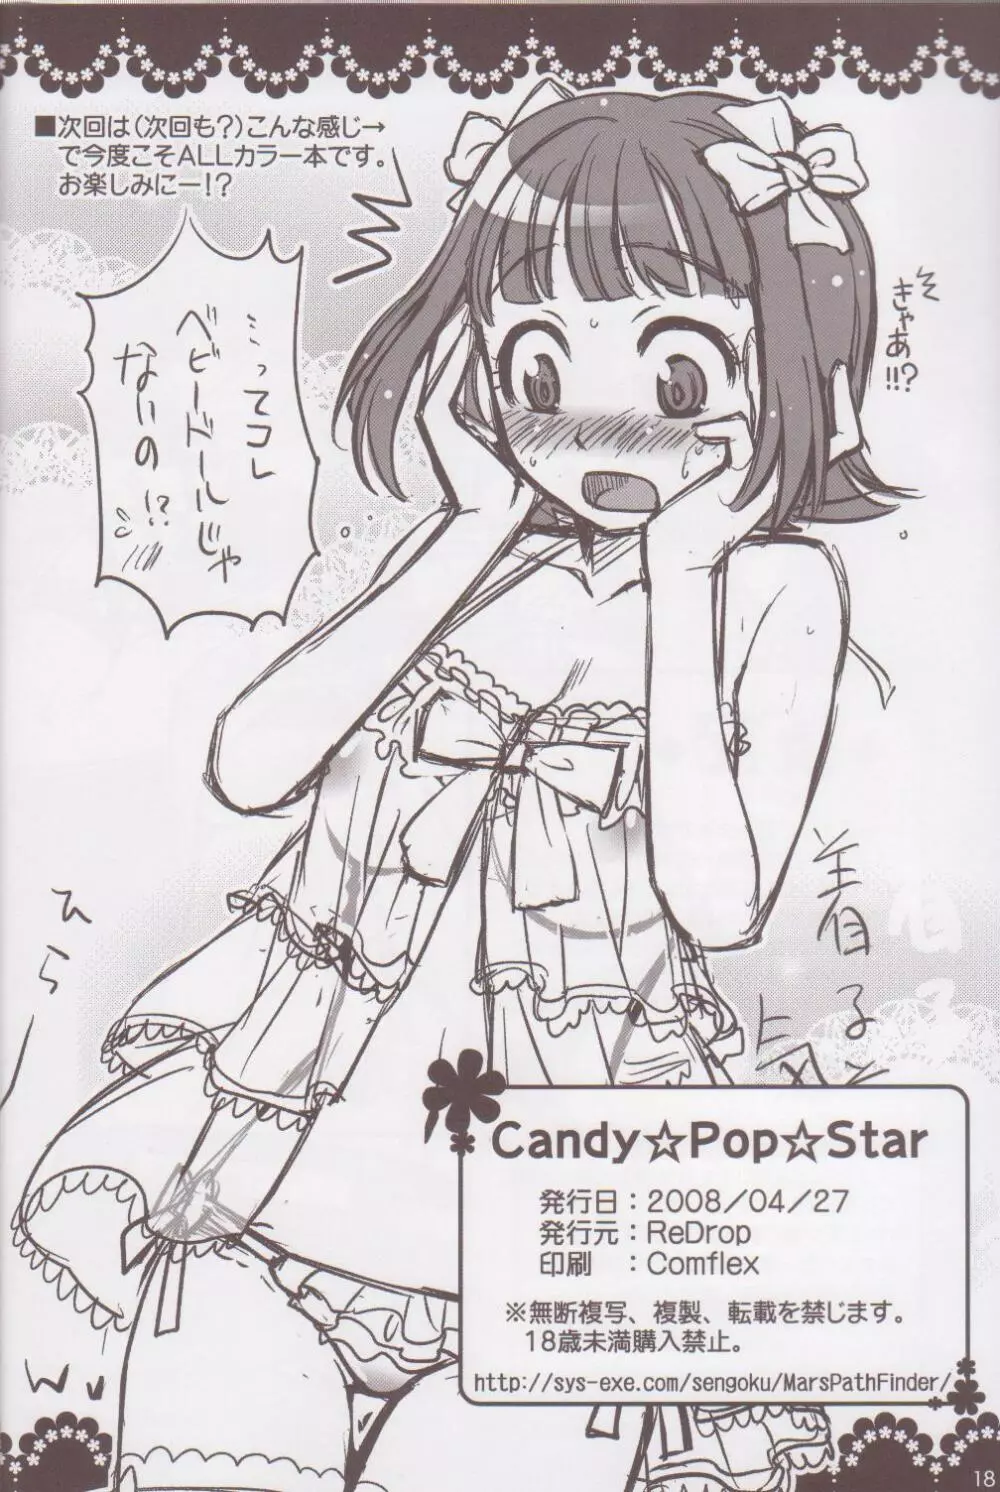 Candy☆Pop☆Star - page17